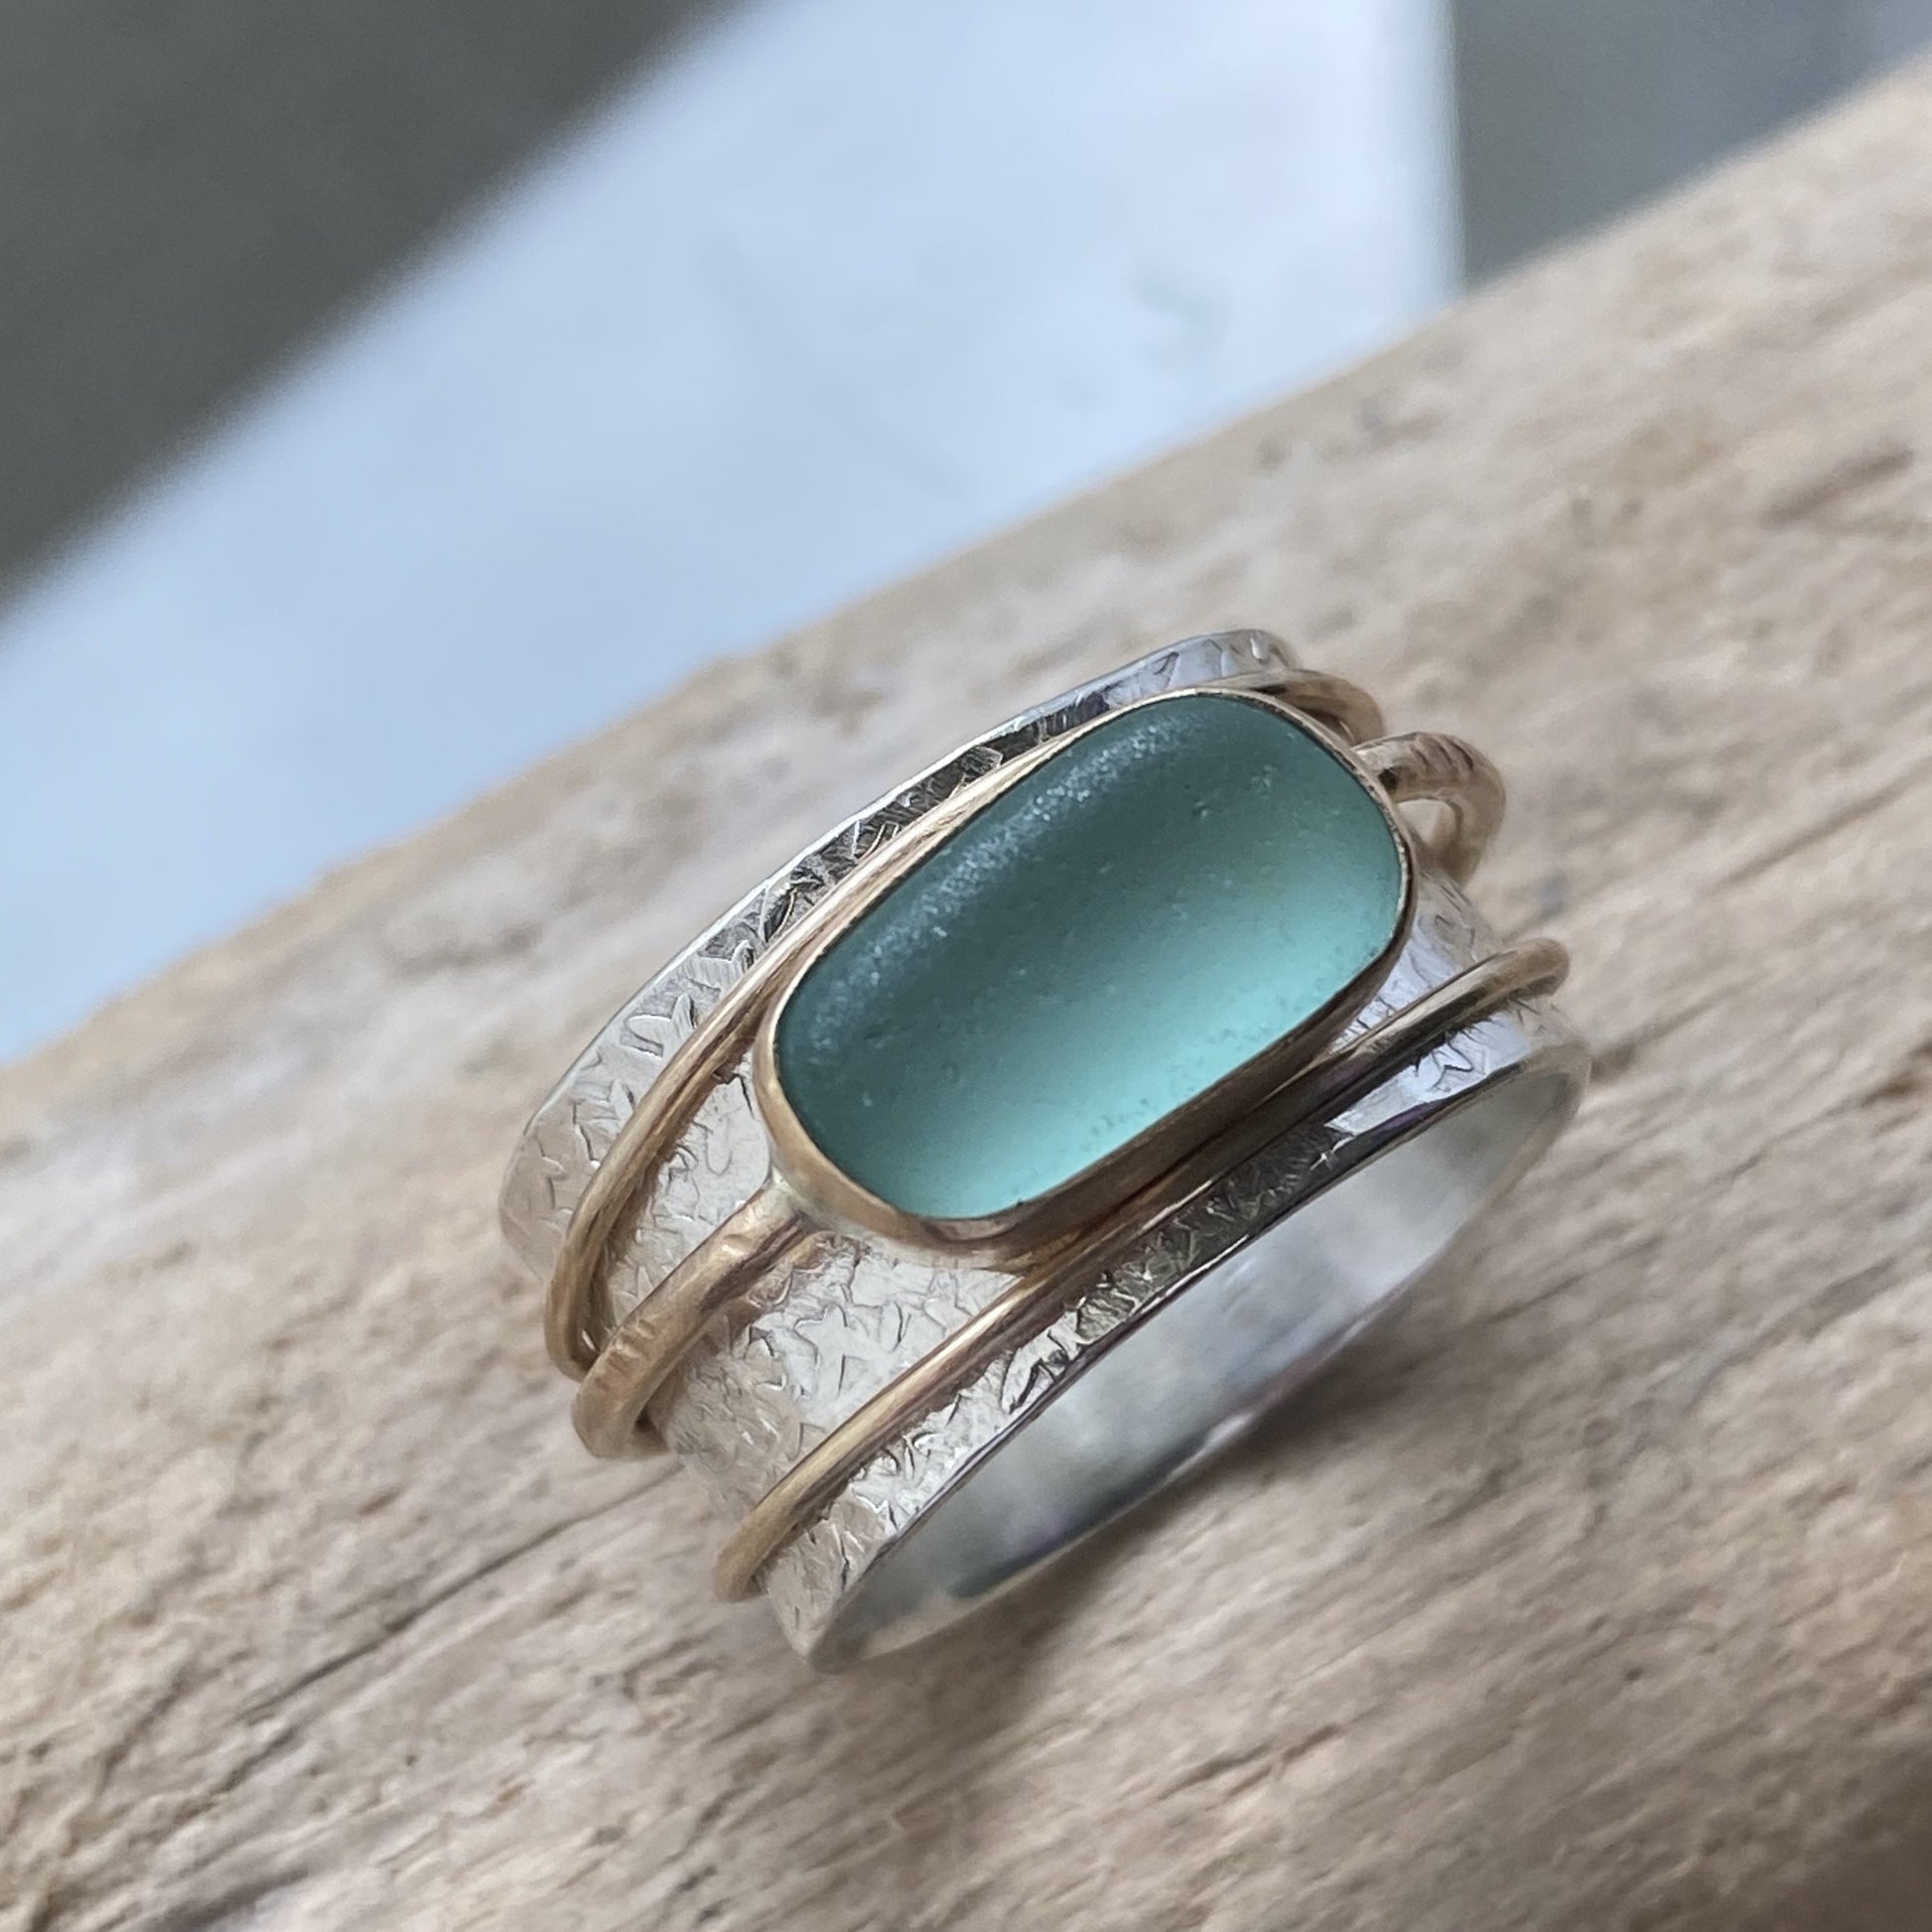 Sea Glass Meditation RingThe Meditation Ring with Extra Gold Bands | Sea Glass Ring